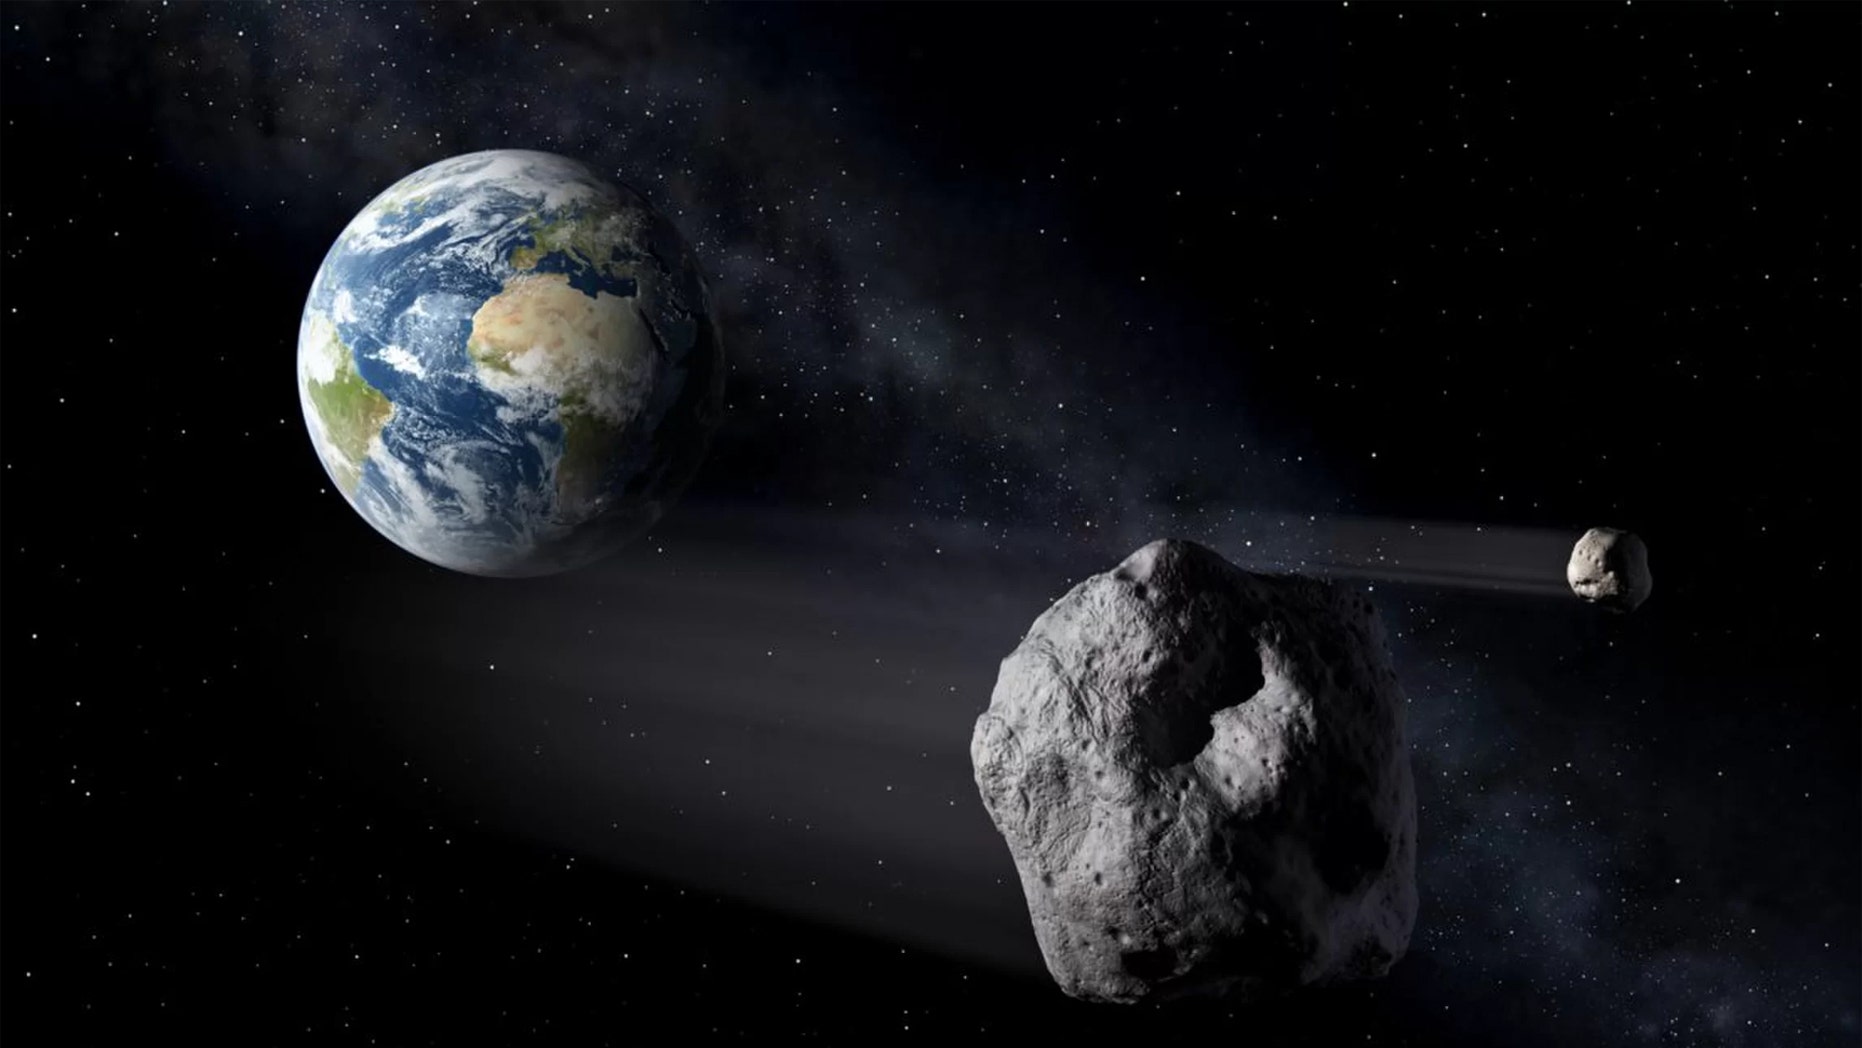 File image - Earth is surrounded by a host of asteroids, some of which may temporarily become "minimoons."